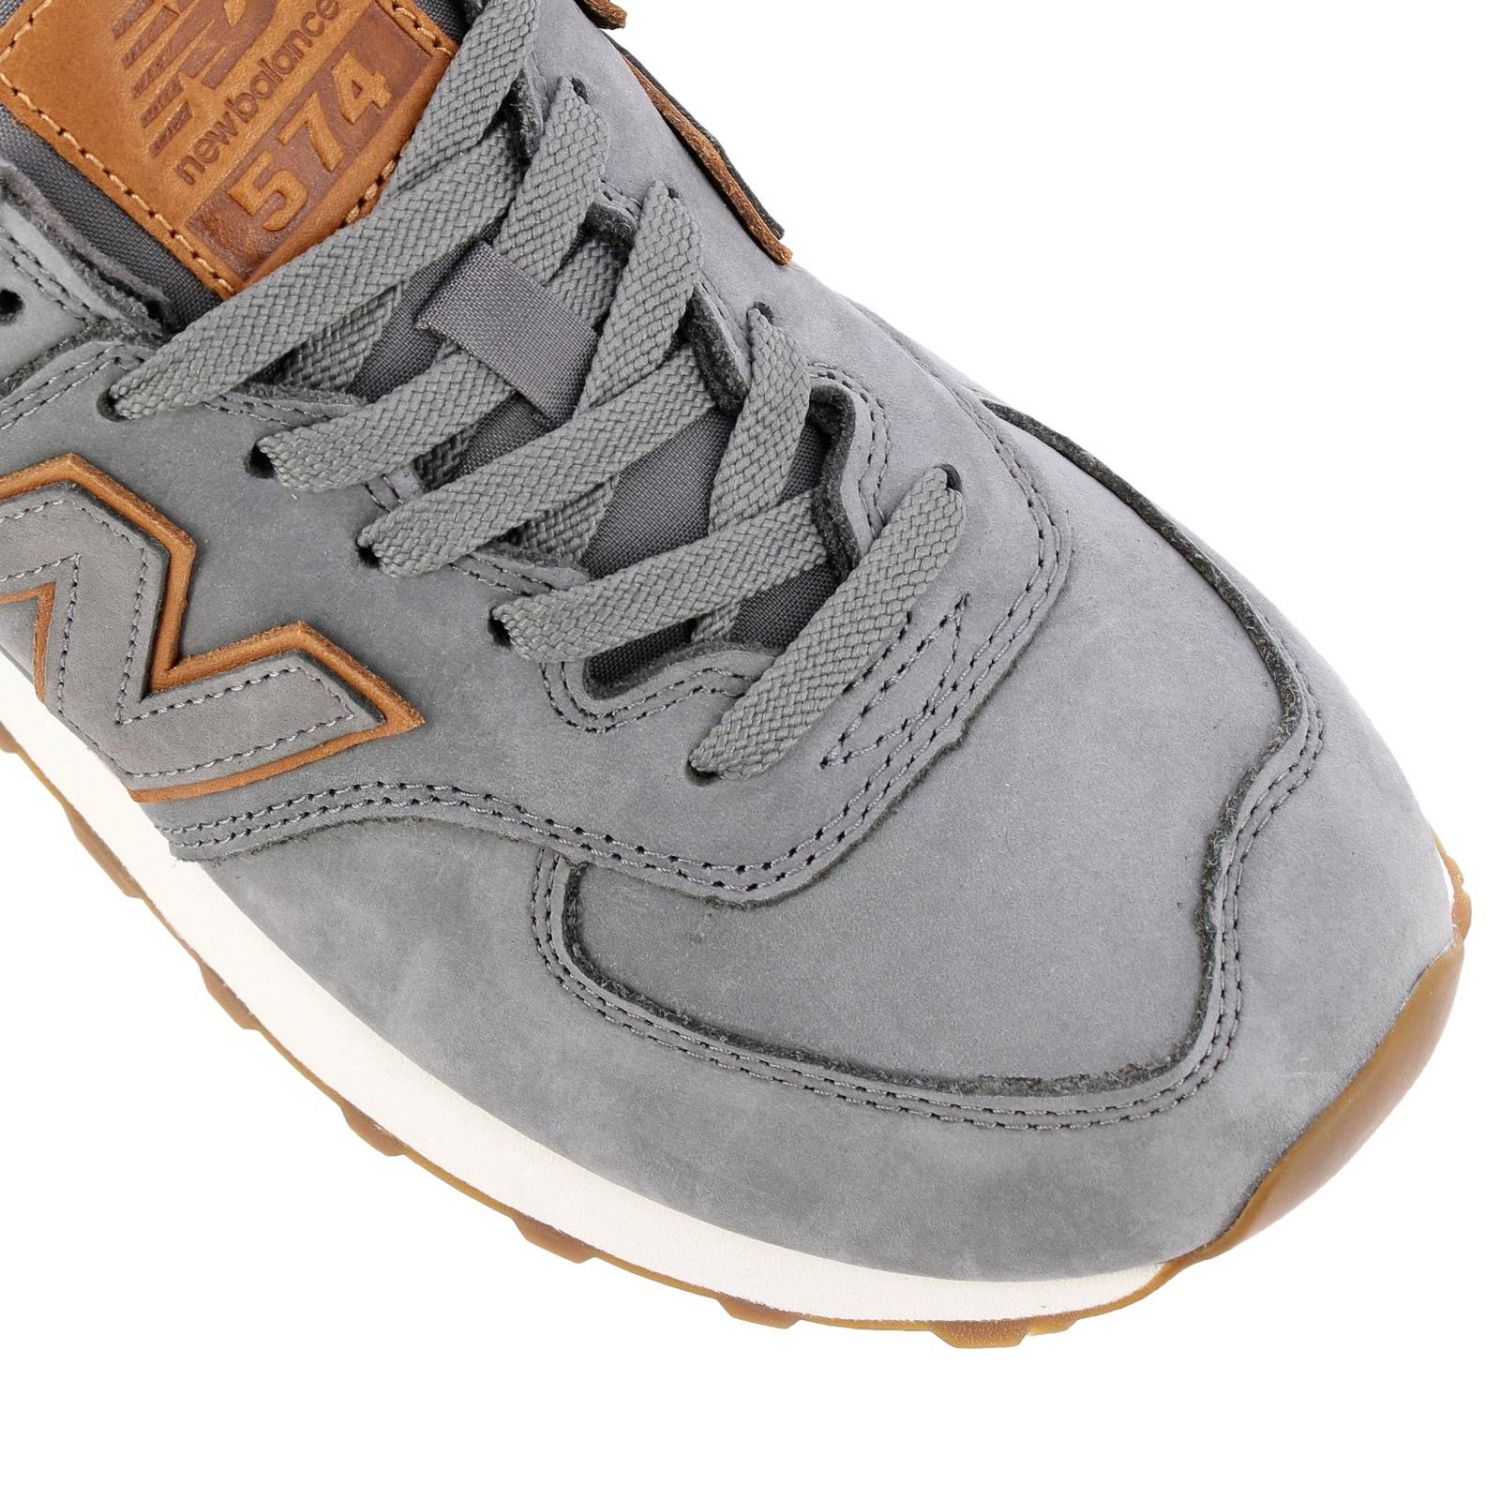 574 New Balance sneakers in suede and nylon تمر الصقعي